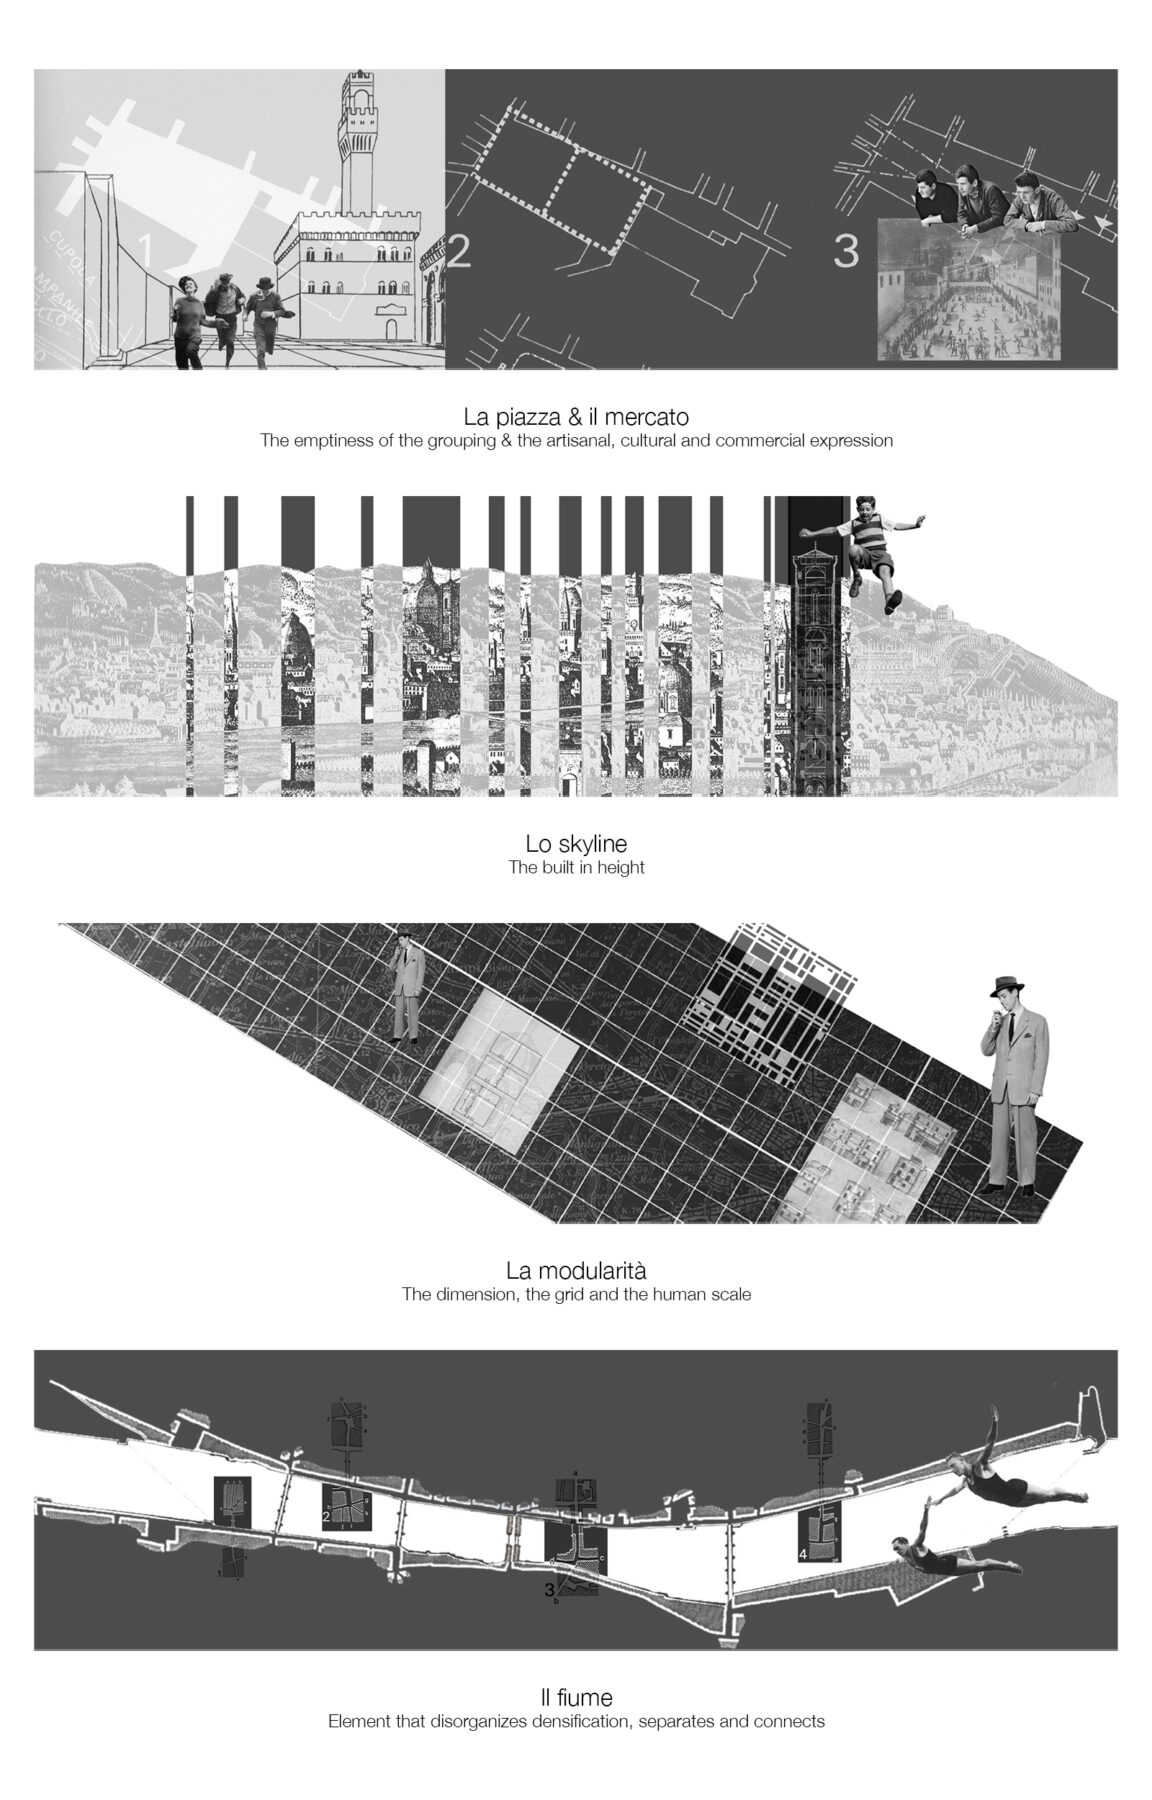 Archisearch Pandemic Architecture_Design of a flexible neighbourhood adapted to the post-pandemic needs and requirements | Diploma thesis by Despoina Myridou